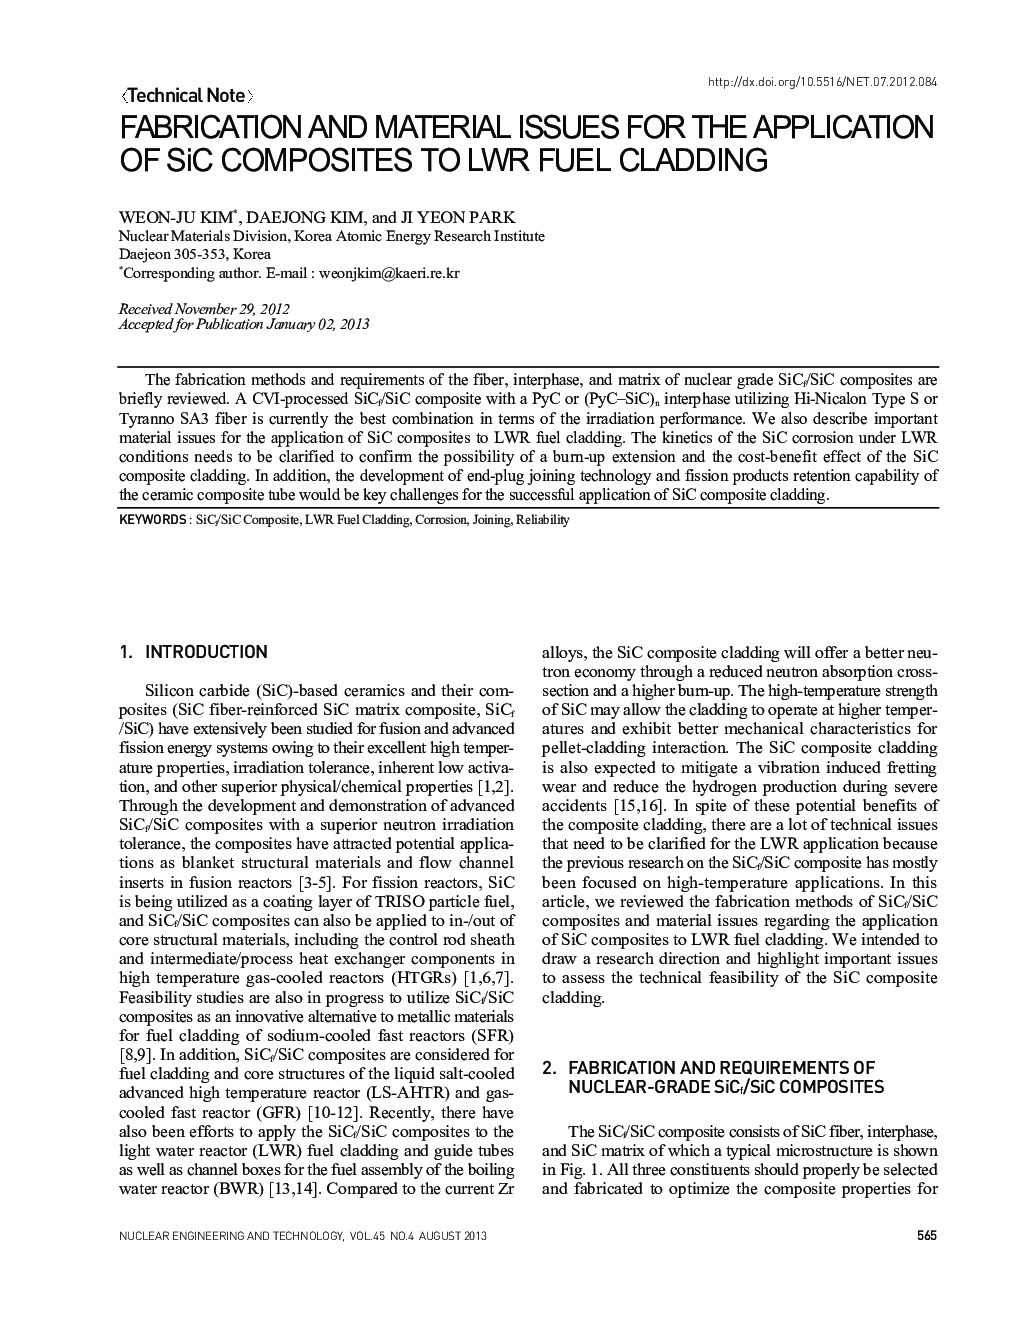 FABRICATION AND MATERIAL ISSUES FOR THE APPLICATION OF SiC COMPOSITES TO LWR FUEL CLADDING